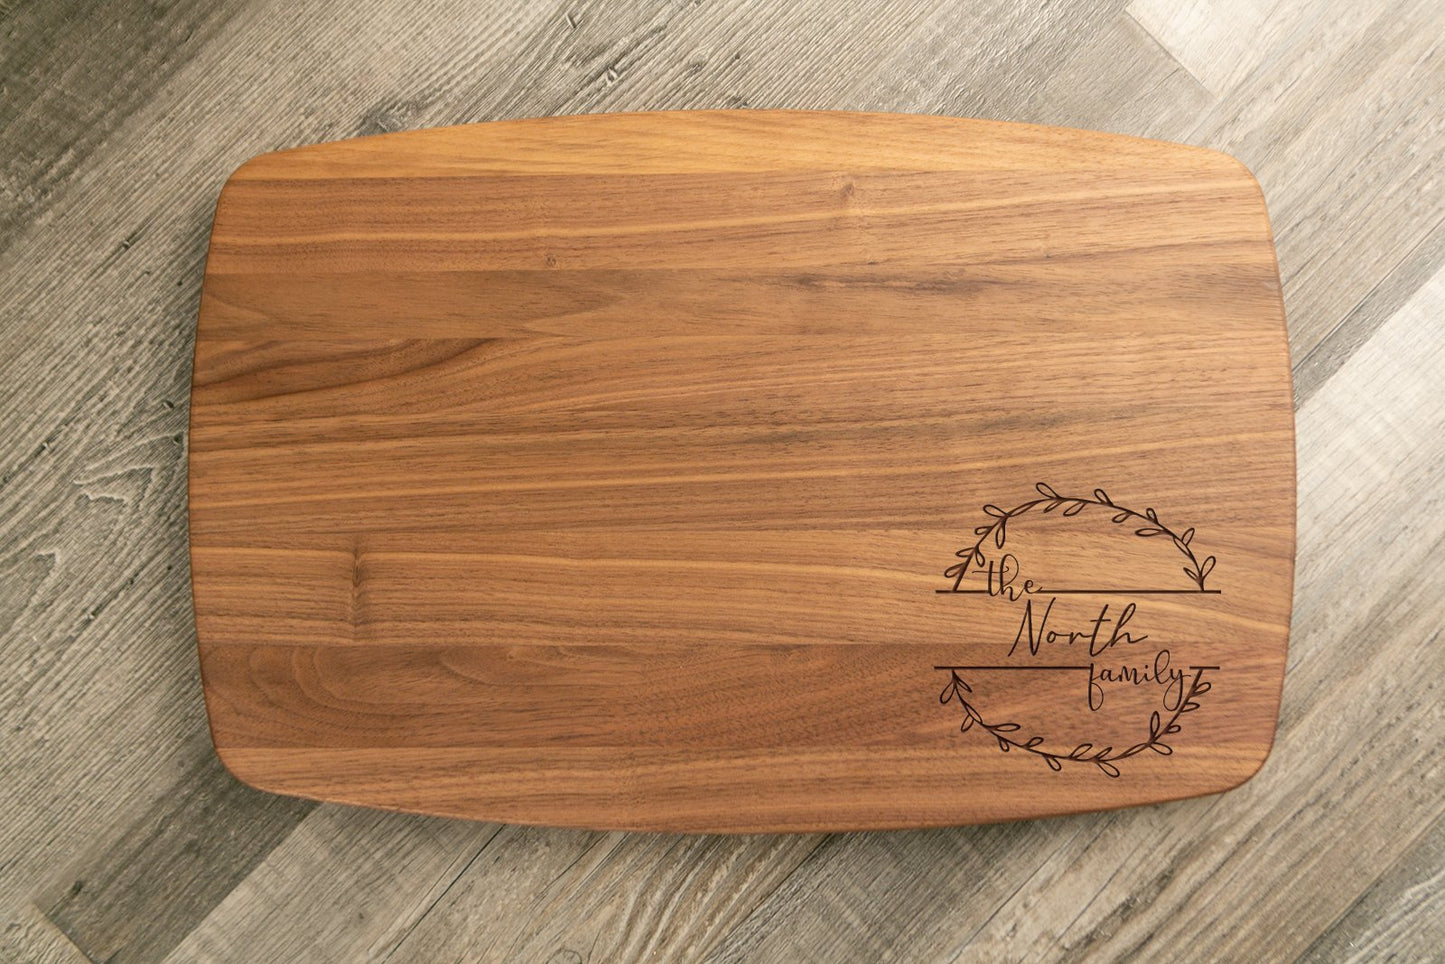 Walnut Charcuterie/Serving board - 10.5"x16" Arched - Etchified-Etchified-1026